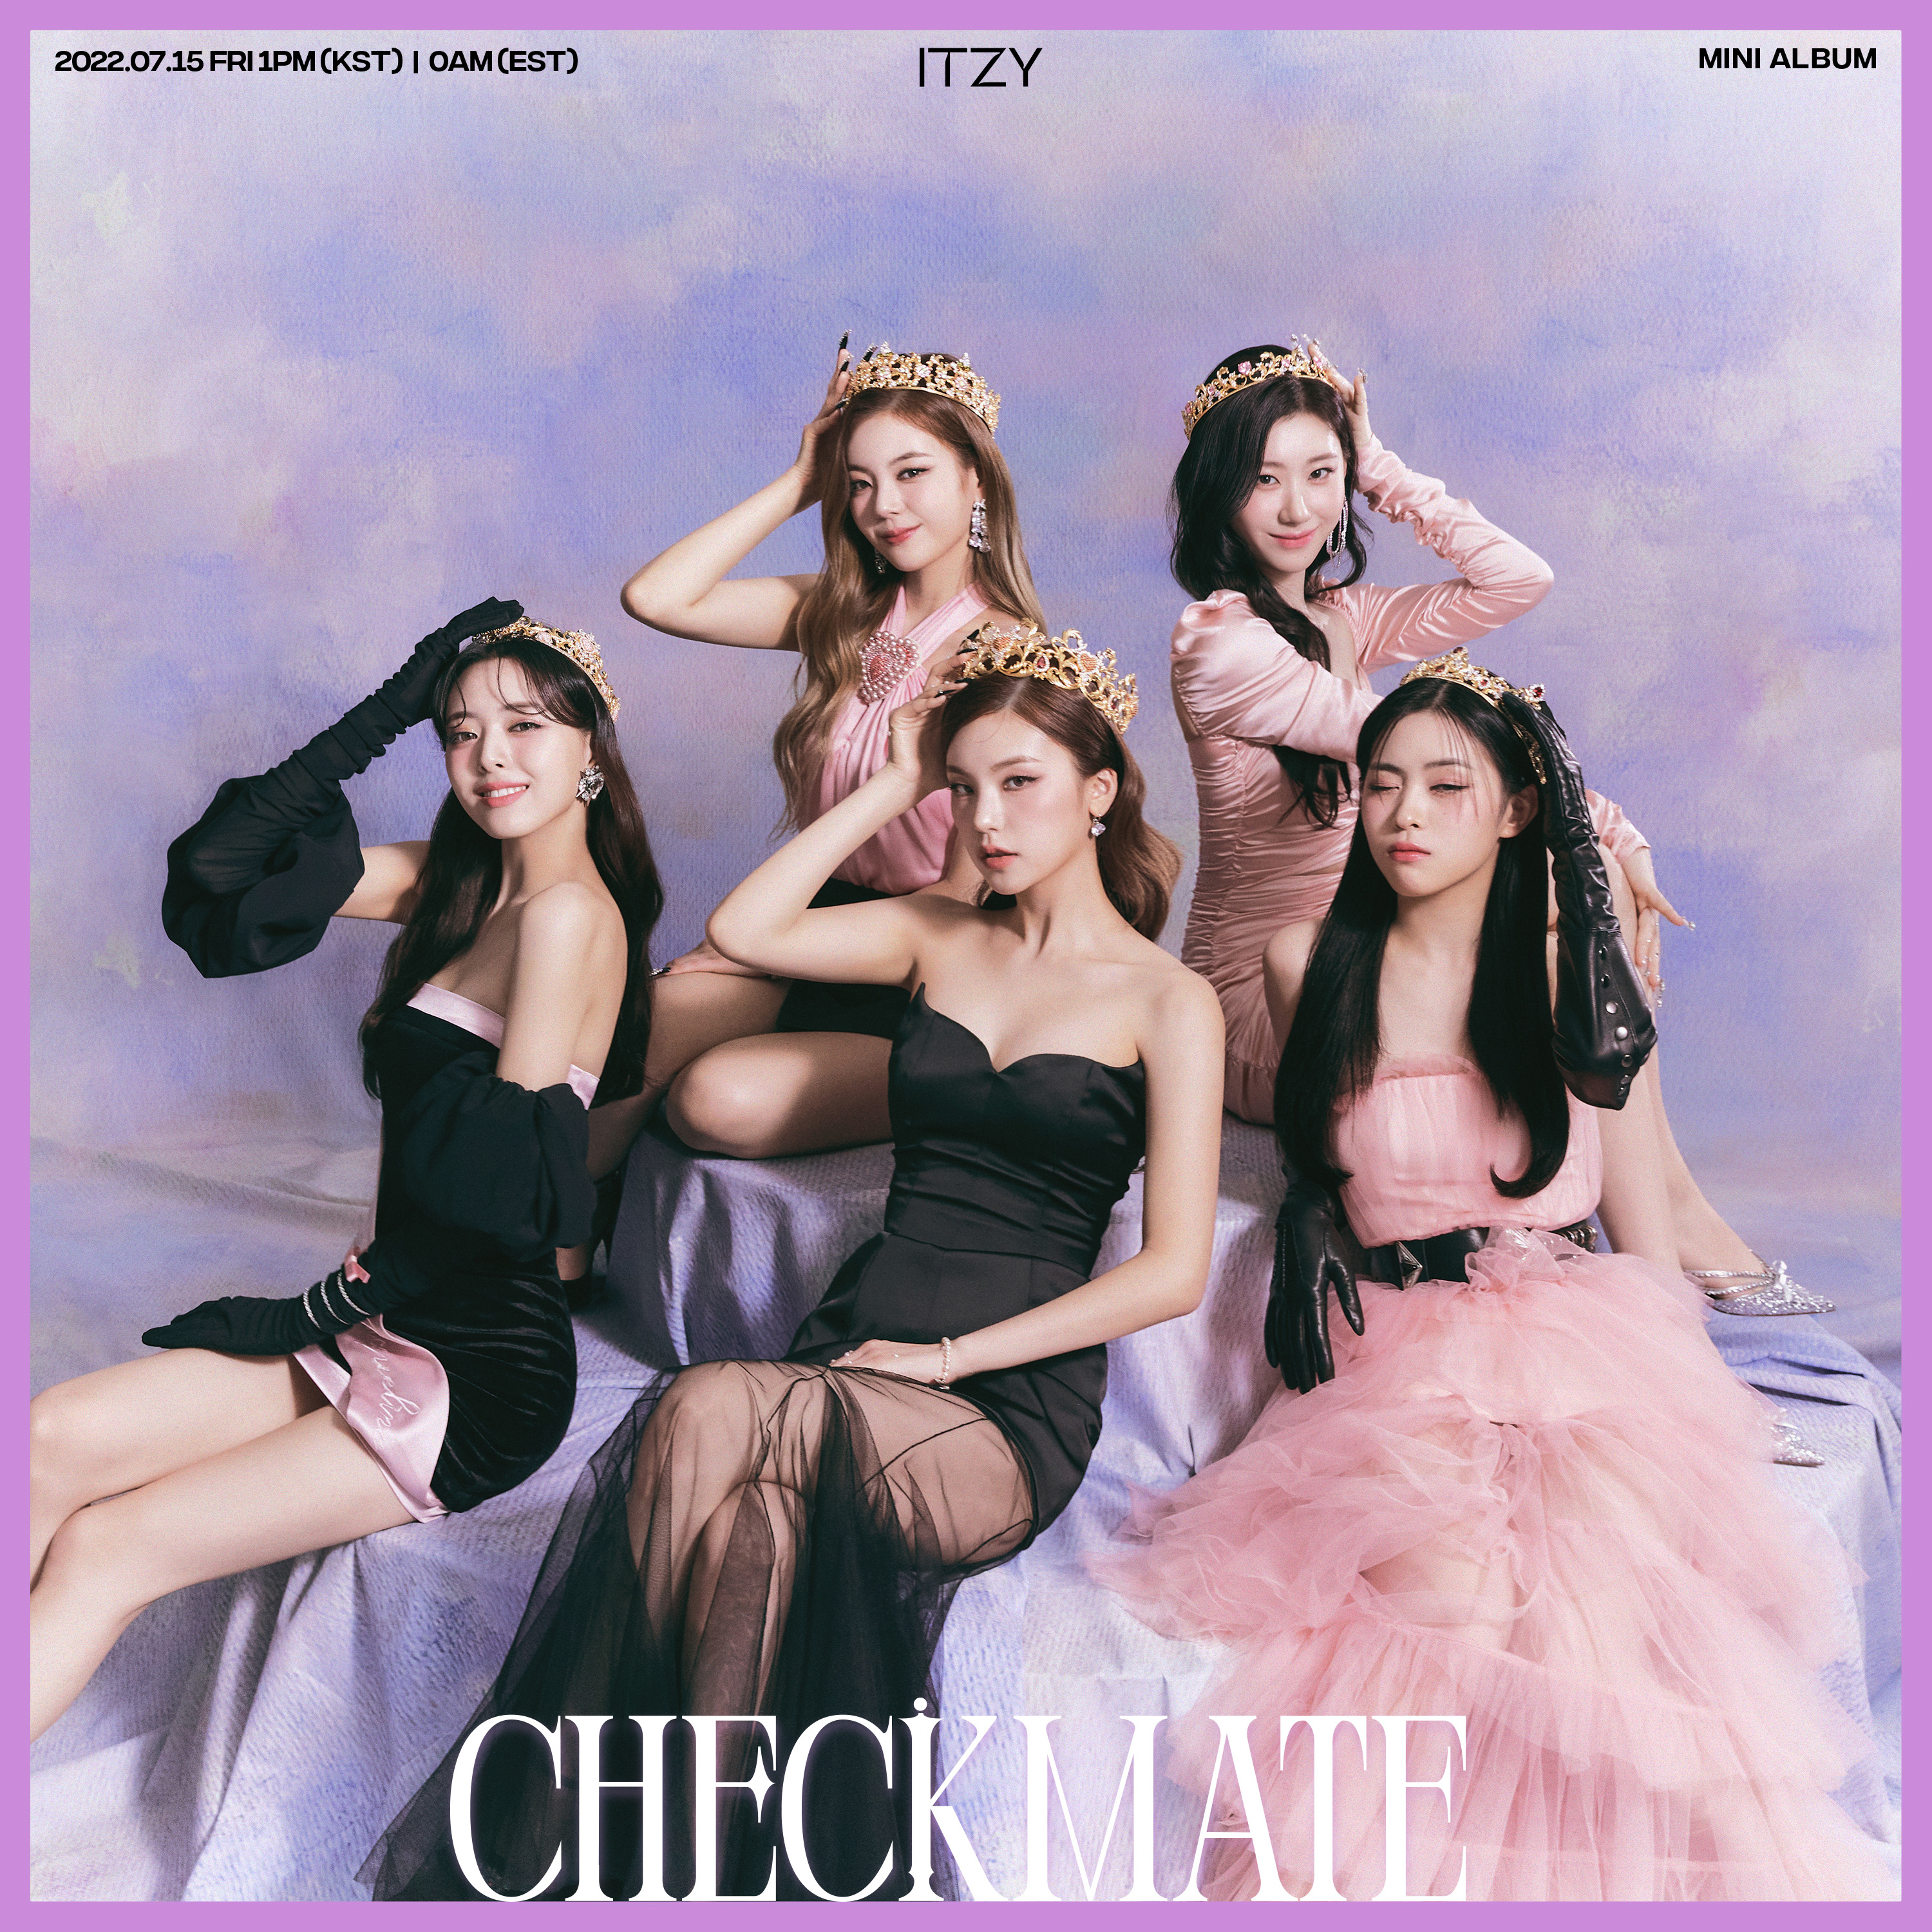 ITZY Checkmate Teaser Concept 2 Group